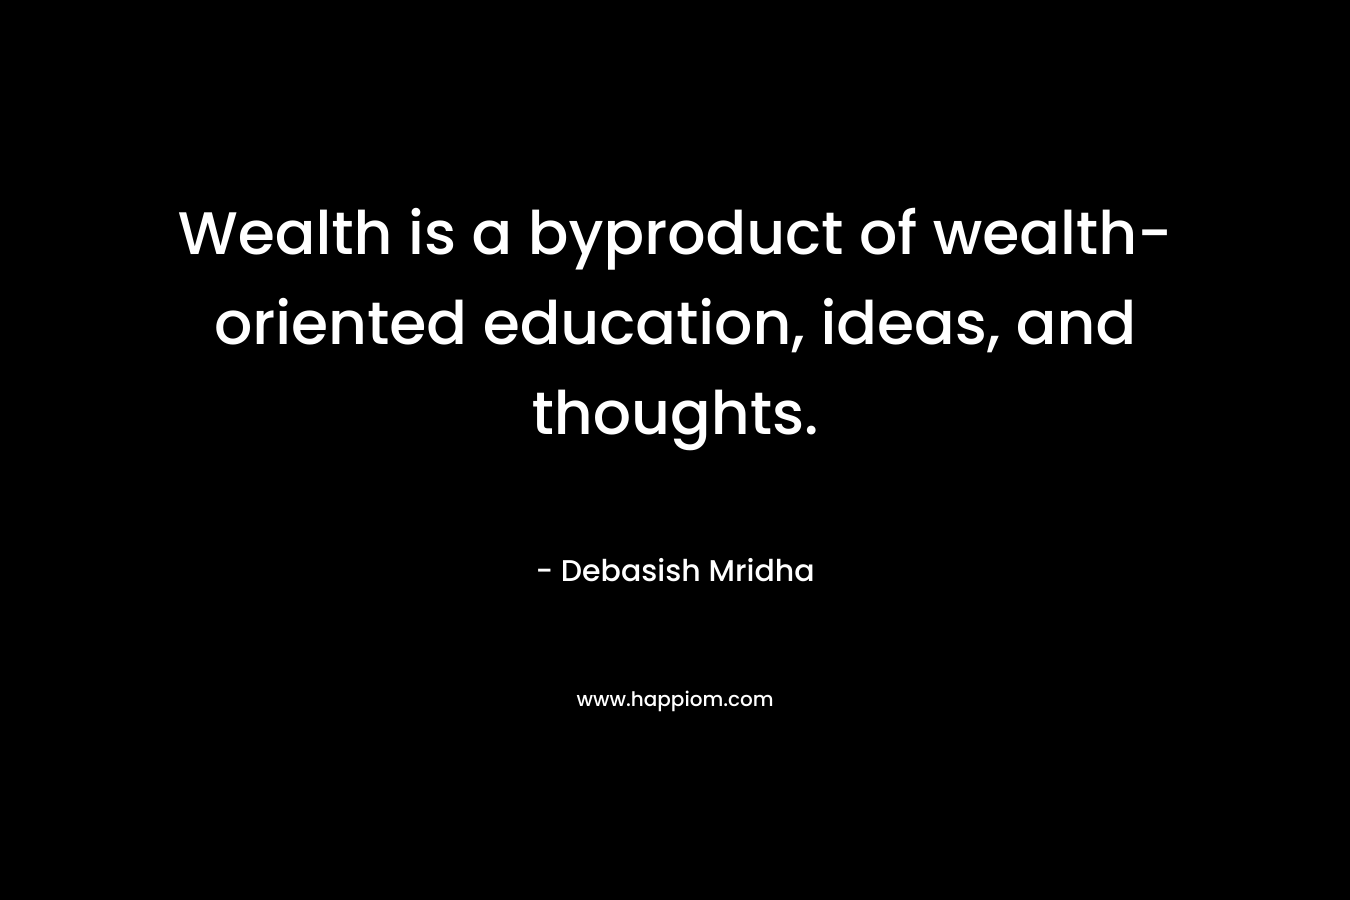 Wealth is a byproduct of wealth-oriented education, ideas, and thoughts.